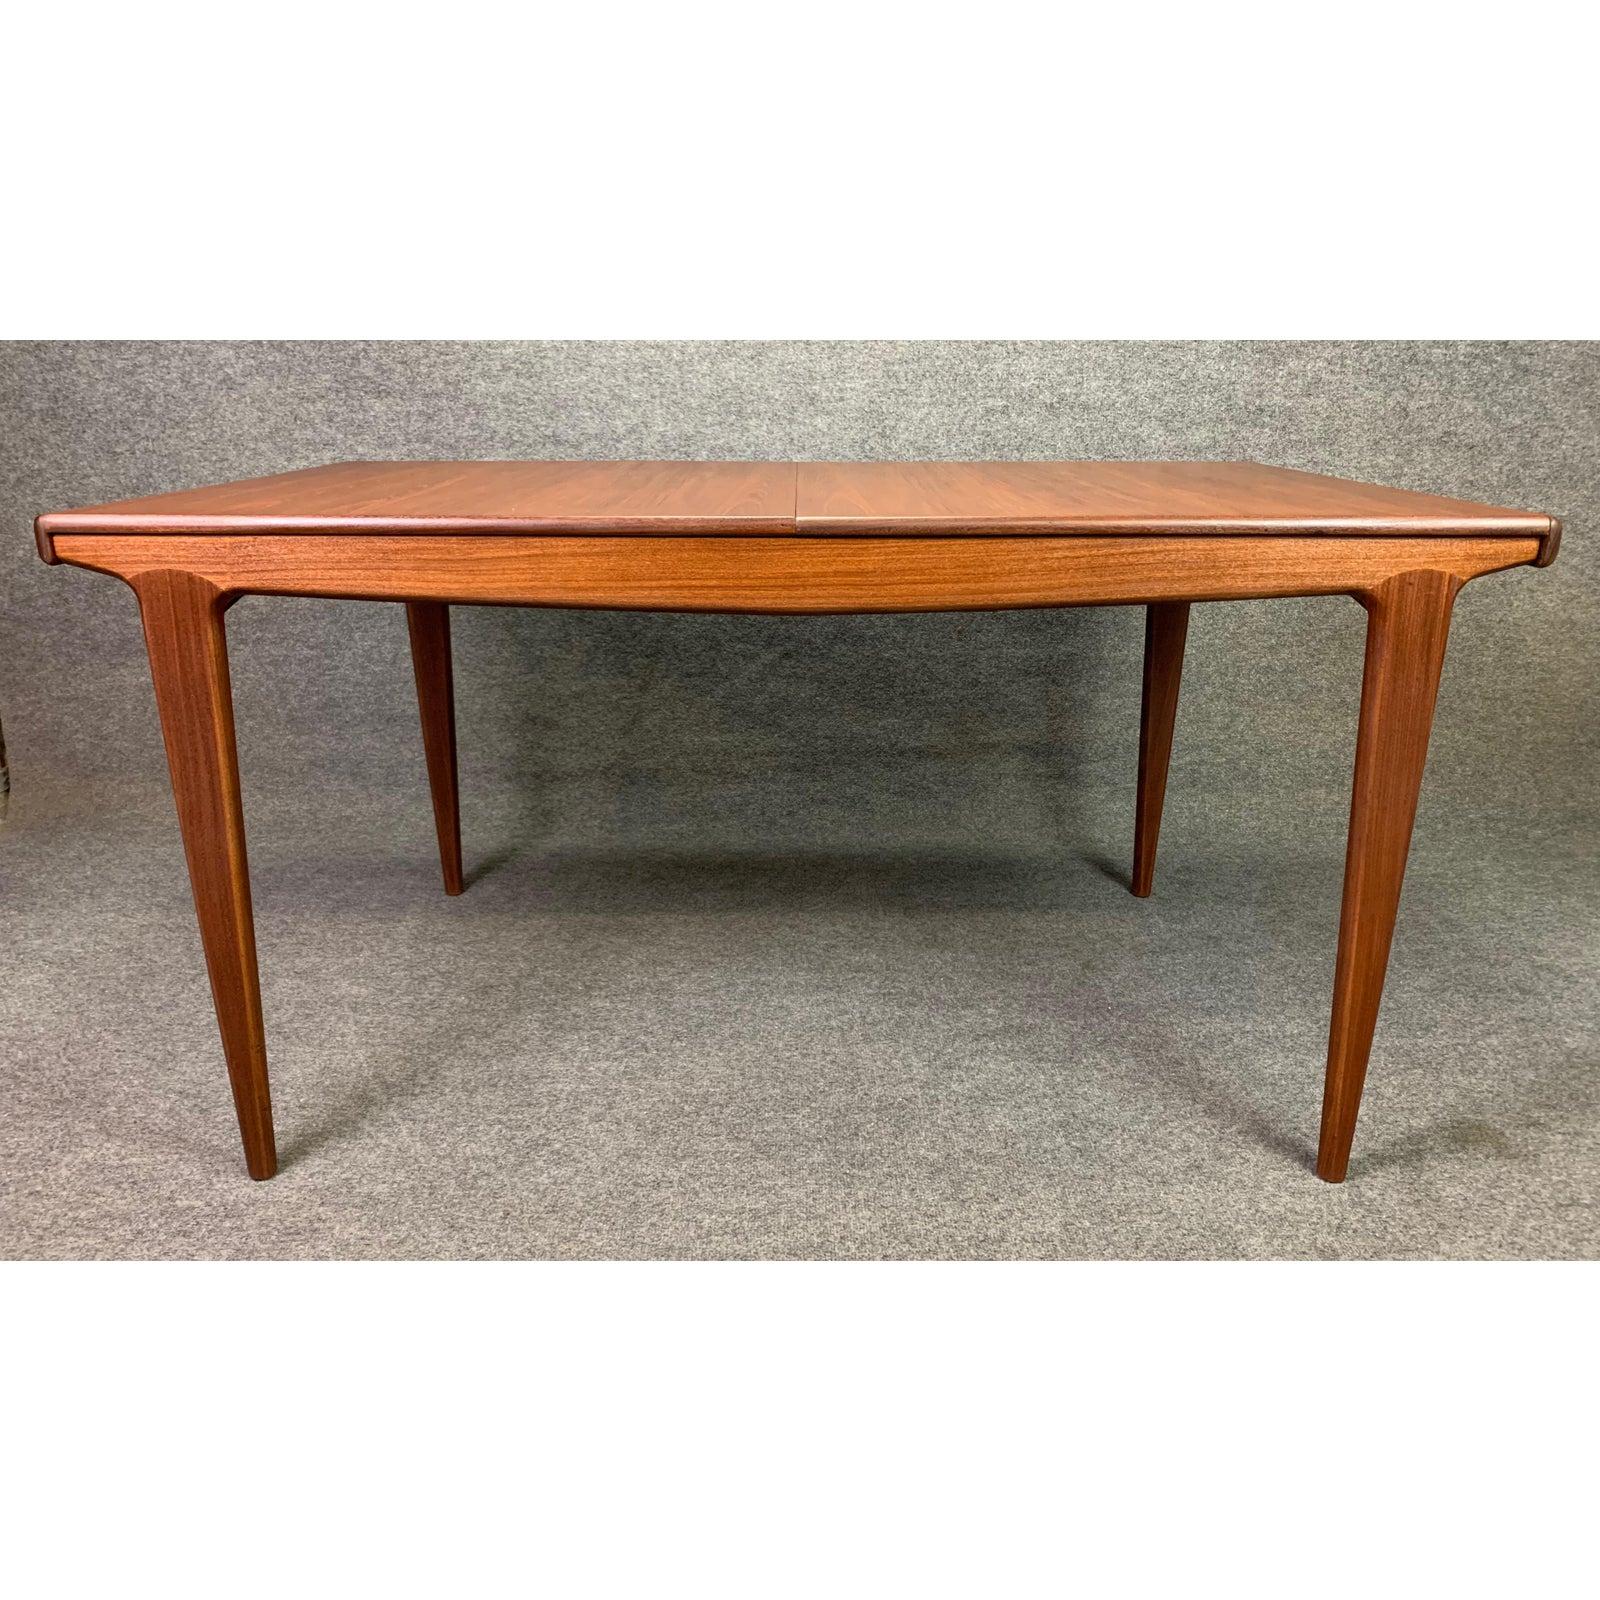 Here is an exclusive British Mid-Century Modern dining table designed by John Herbert and manufactured by A. Younger Ltd in Scotland in the 1960s.
This beautiful table, recently imported from UK to California before its restoration, features a